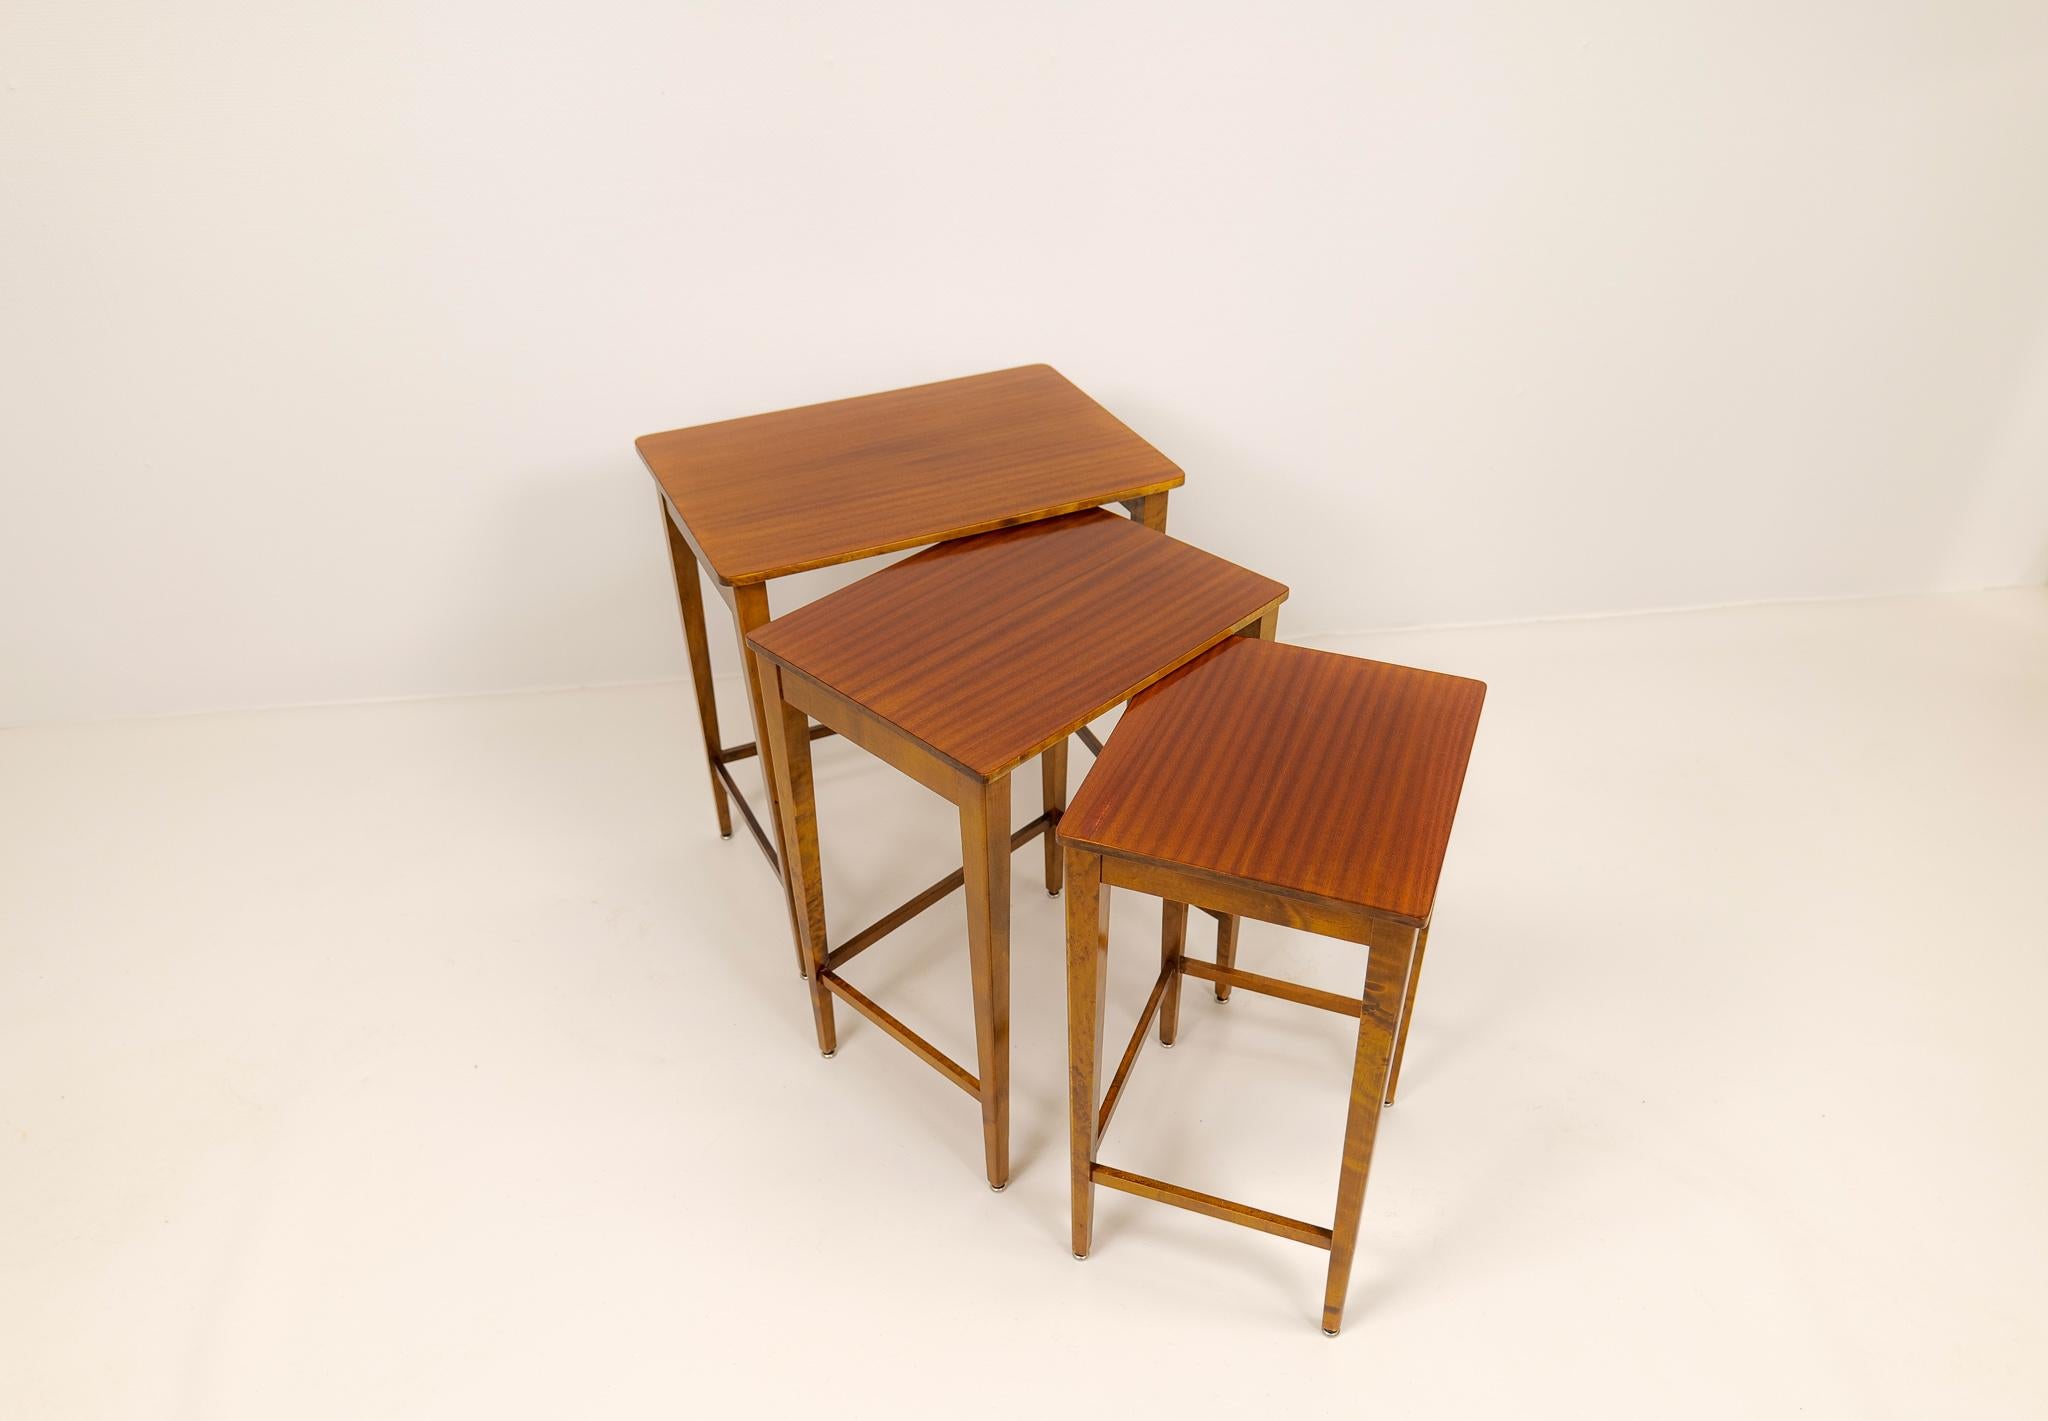 Art Deco Nesting Tables Mahogany and Stained Birch, NK Sweden, 1940s For Sale 6